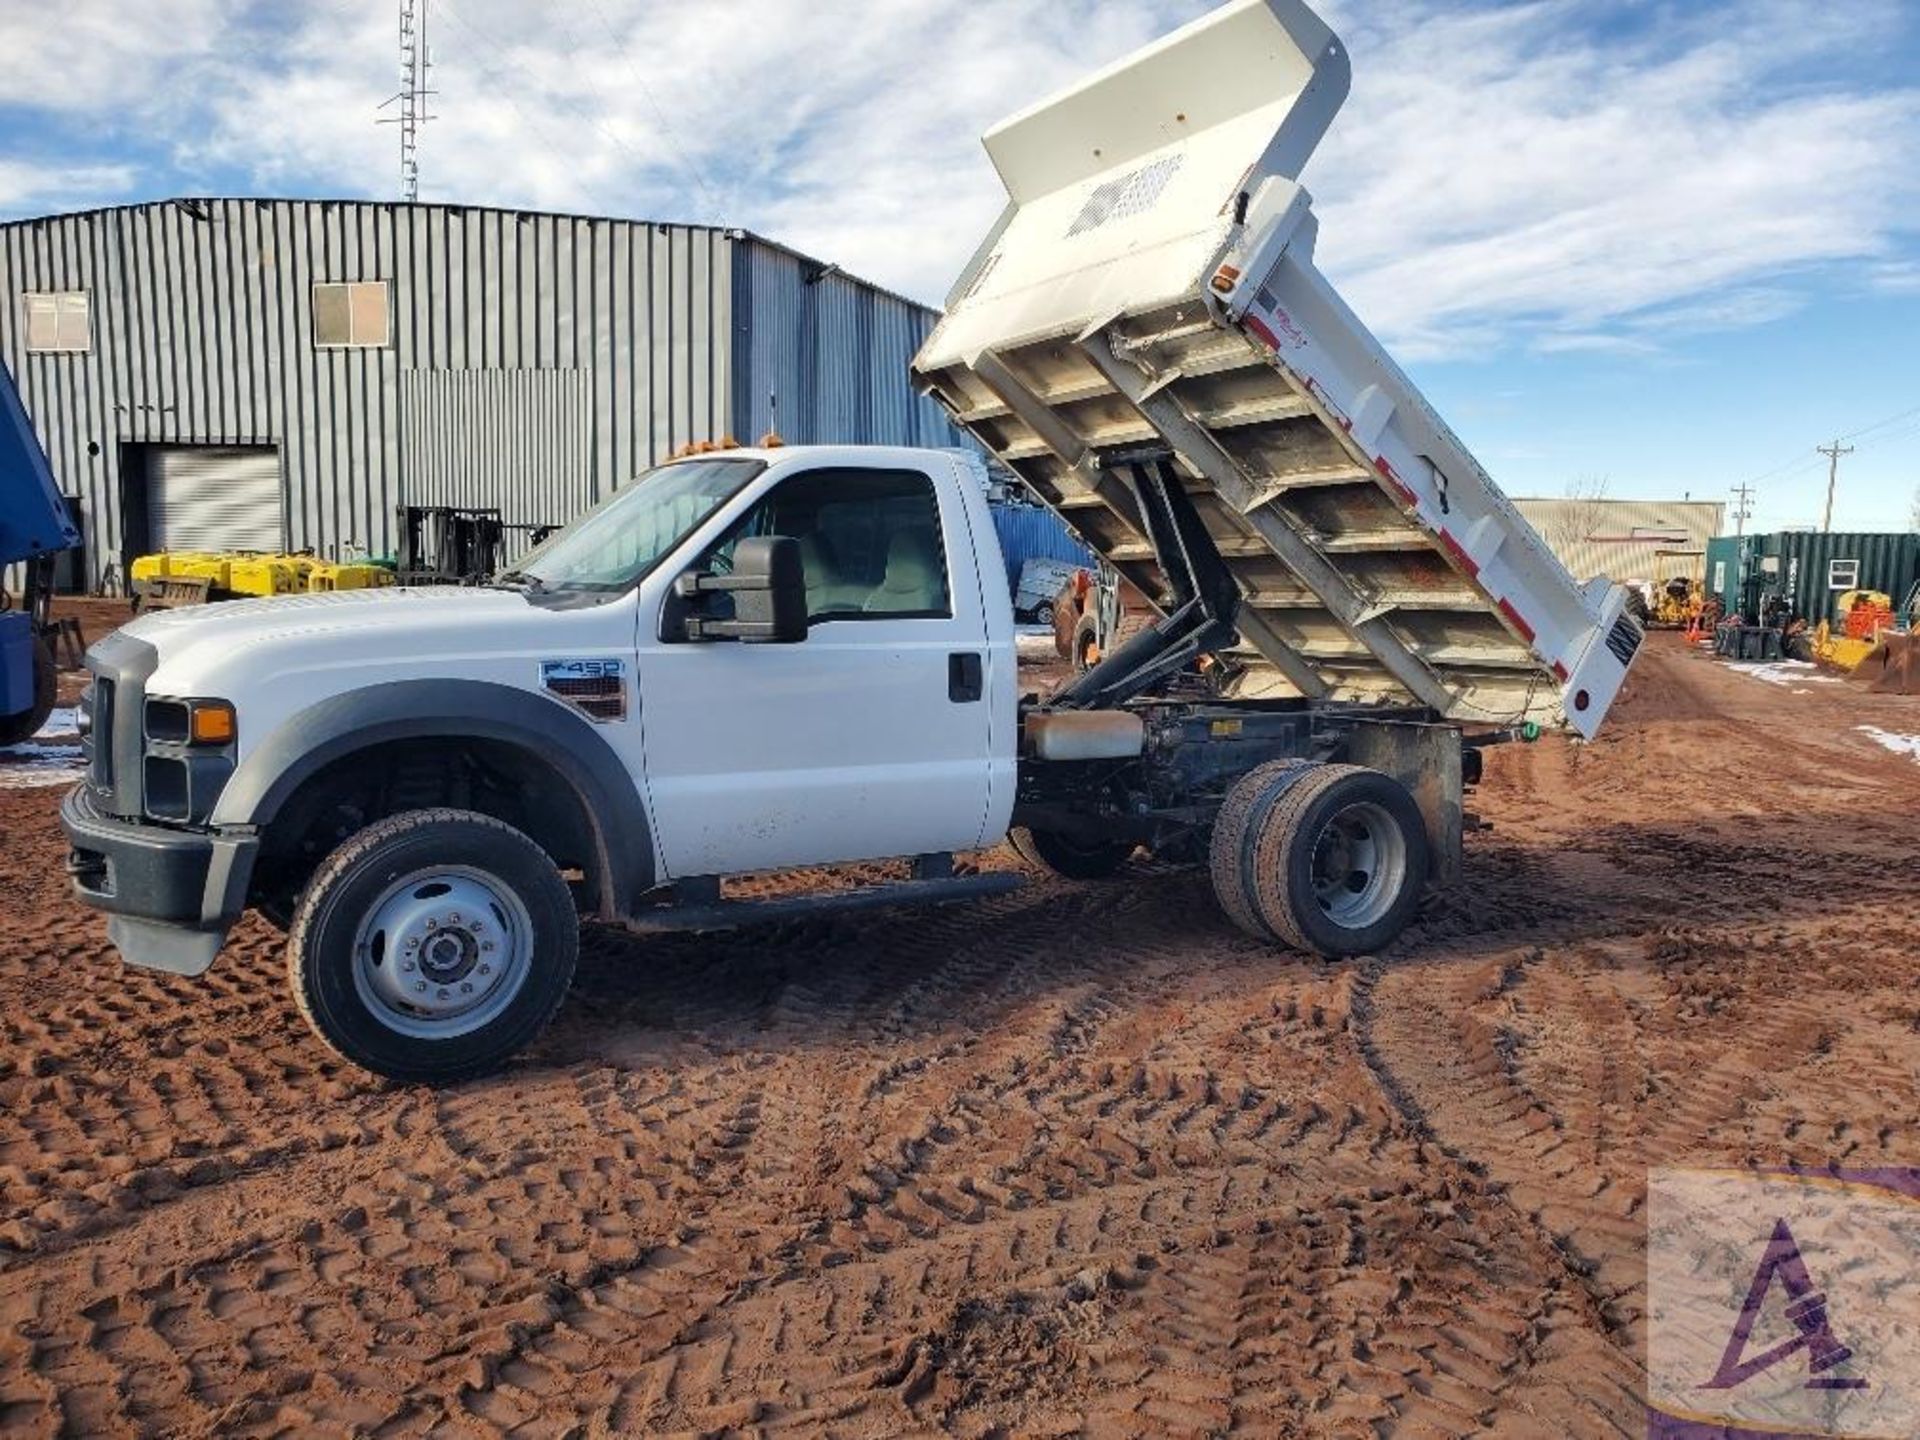 2008 Ford F-450 4X4 Dump Truck - Image 2 of 54